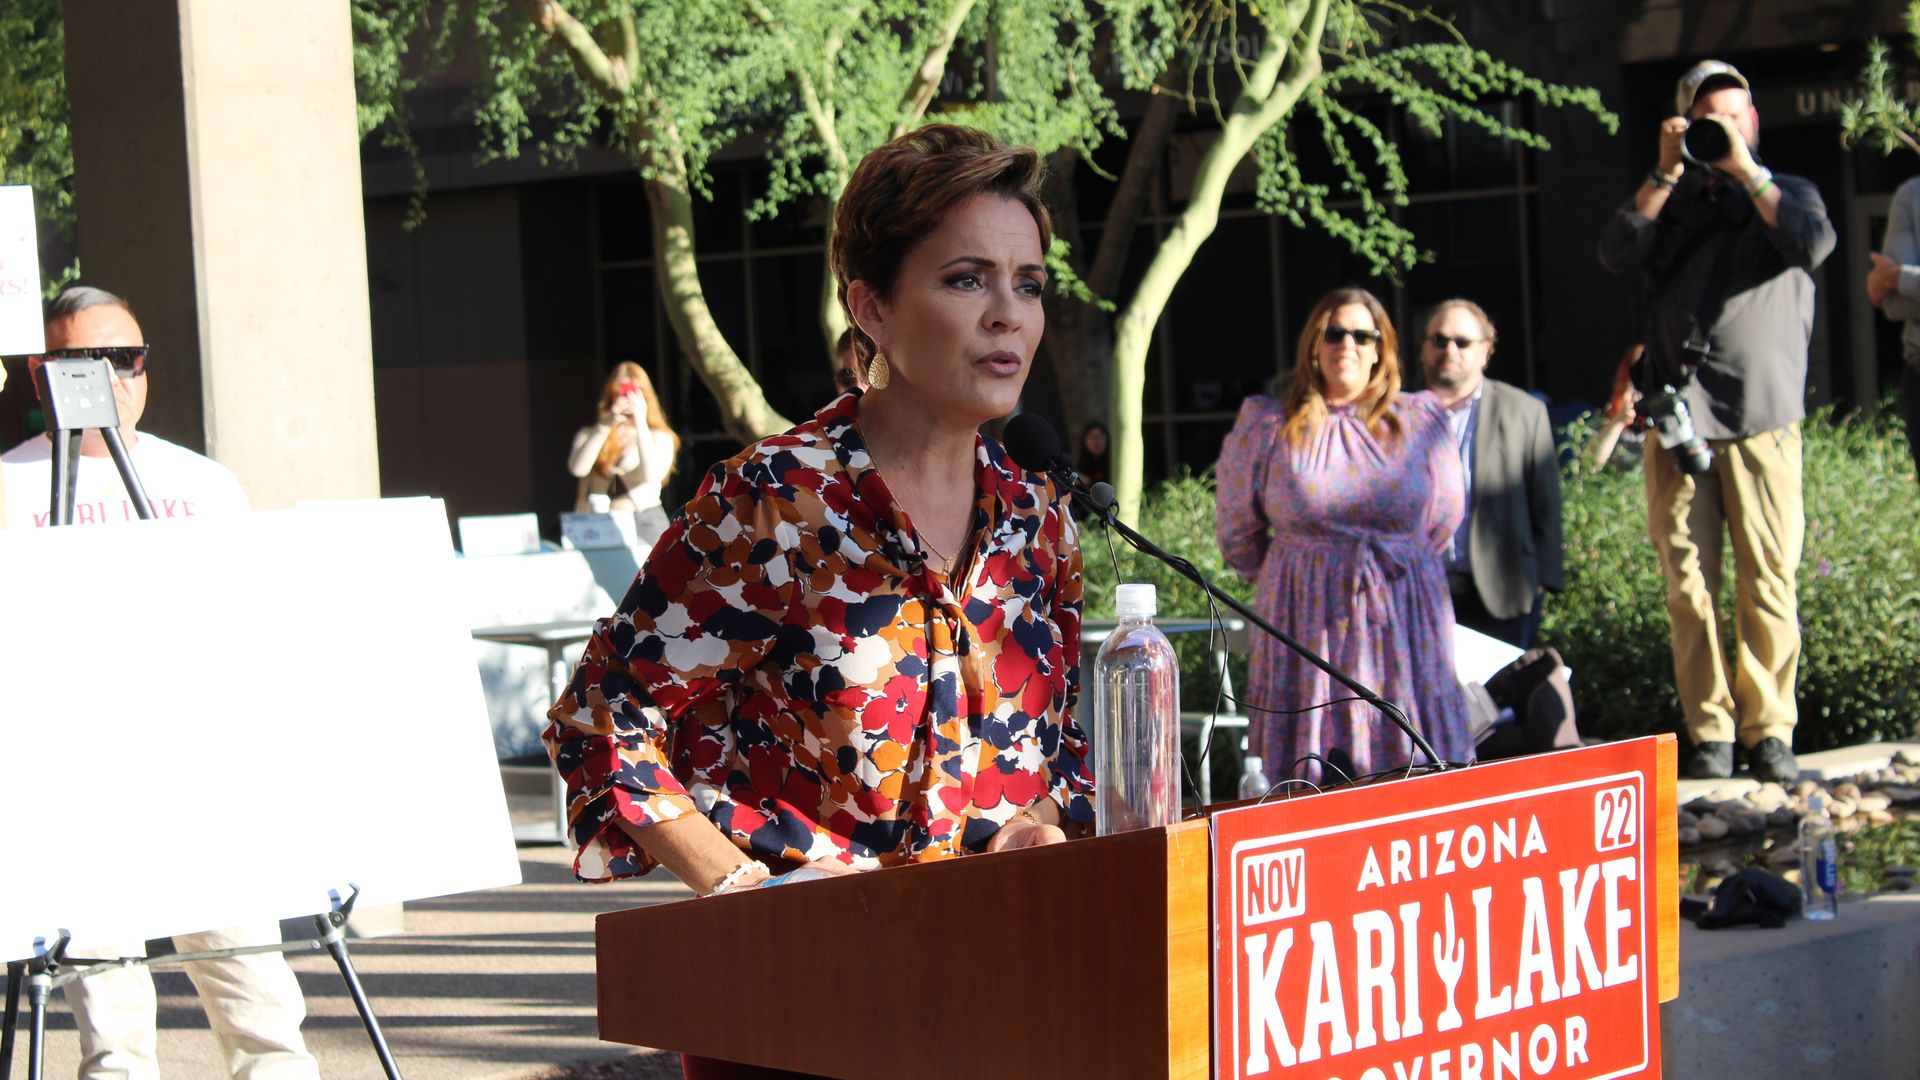 Kari Lake speaks at a lectern with her campaign sign on the front